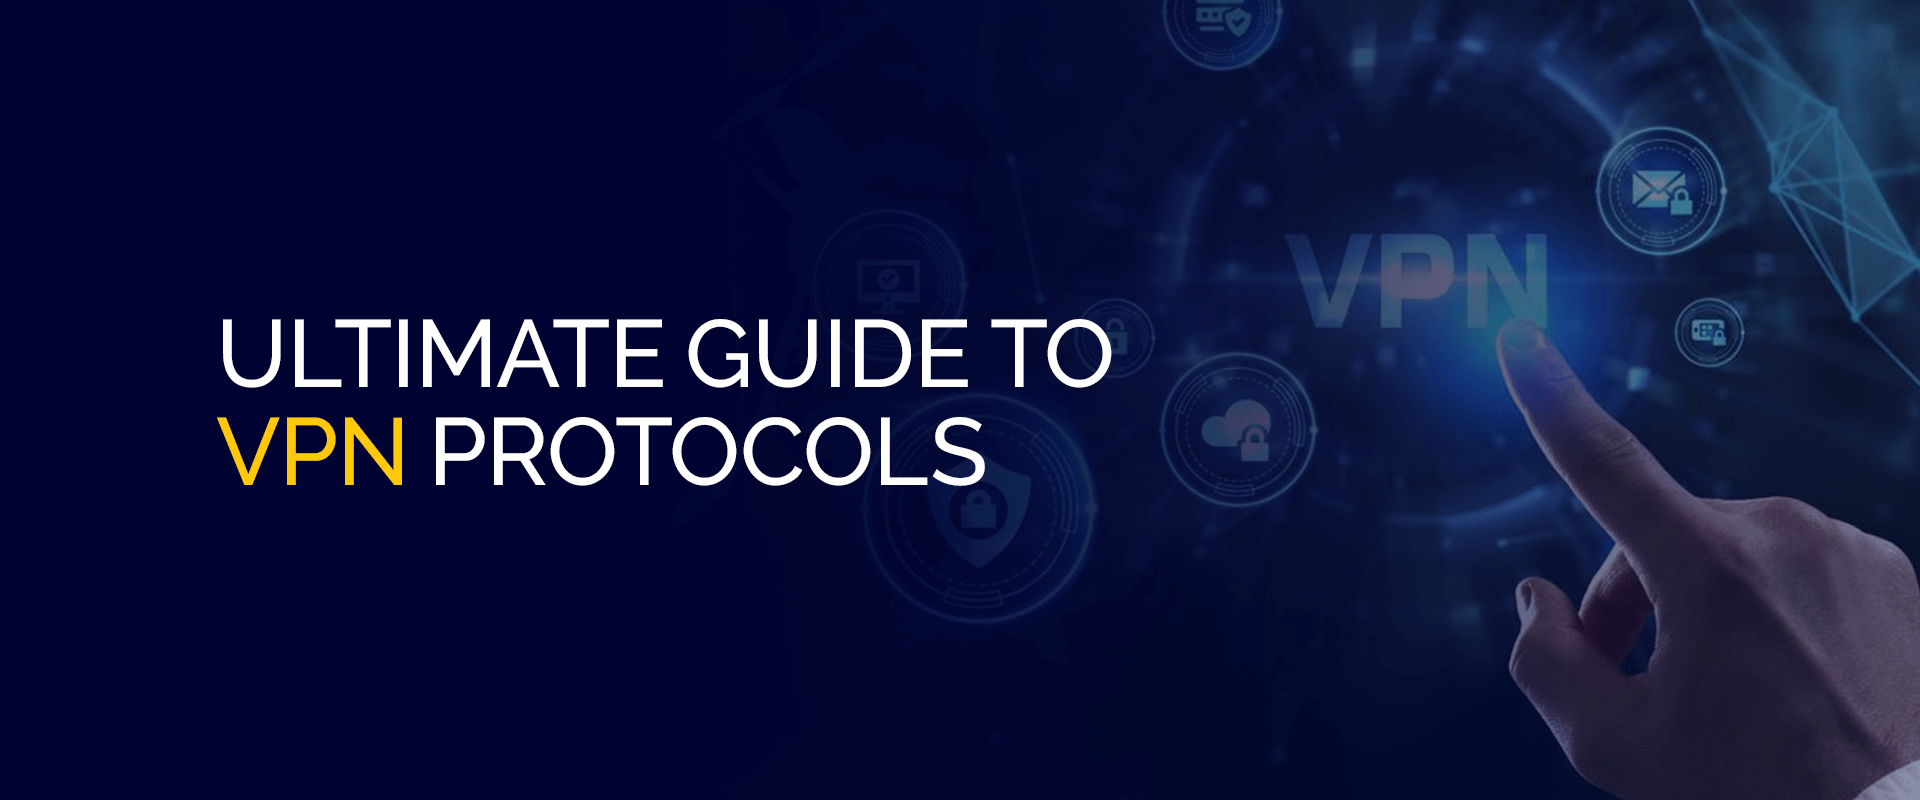 Ultimate Guide to VPN Protocols